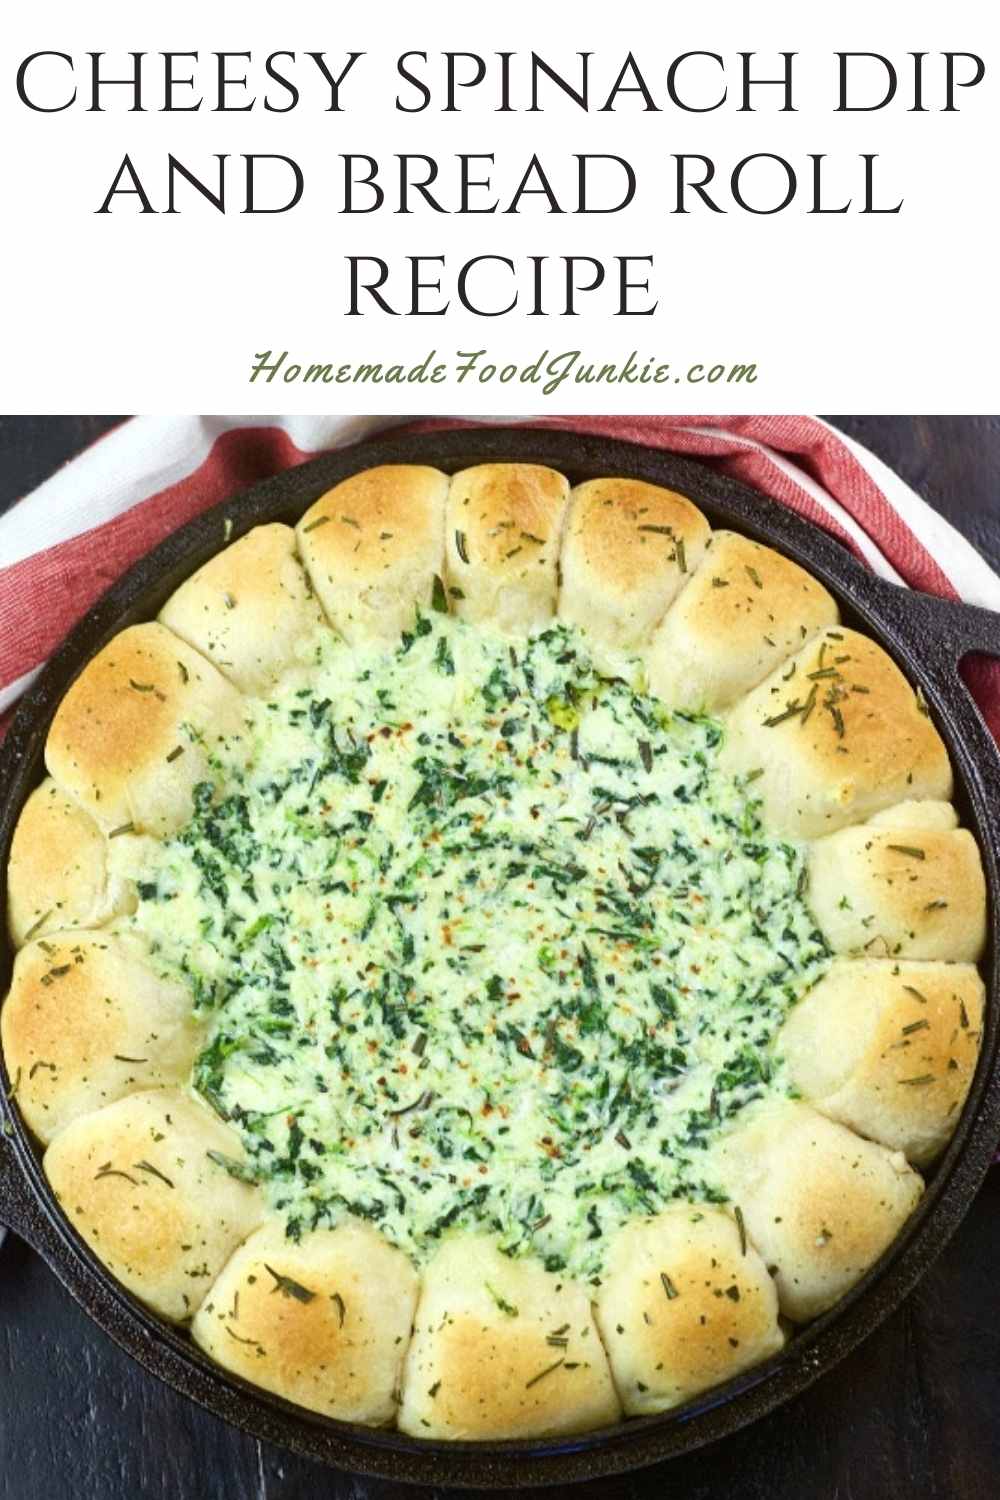 Cheesy Spinach Dip And Bread Roll Recipe-Pin Image